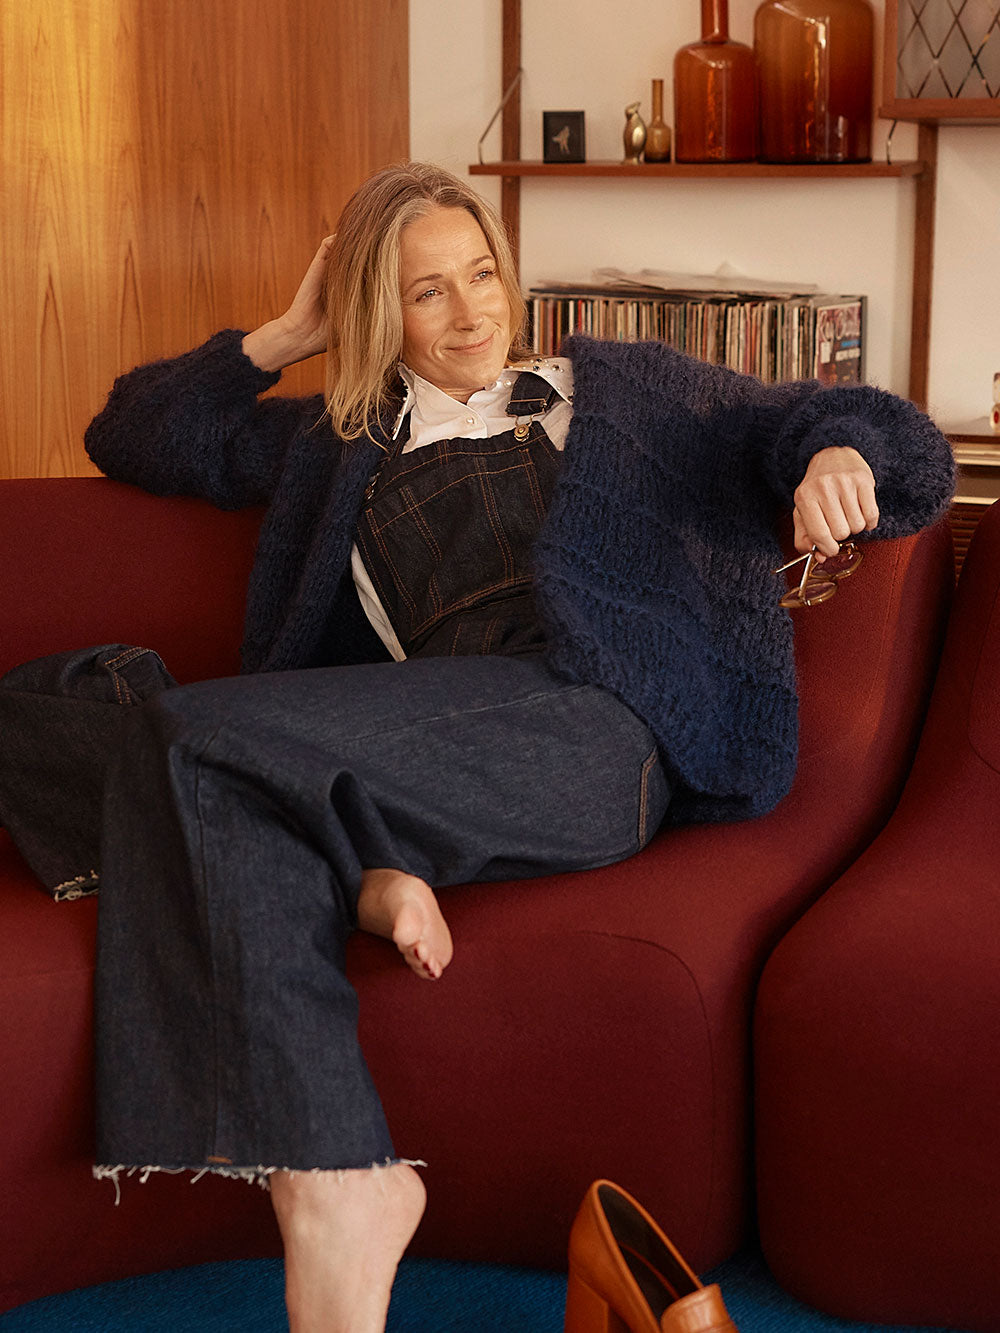 Woman lounges on red couch, she is smiling at the camera and wearing a navy blue knitted mohair cardigan and denim overalls with a white collared shirt.